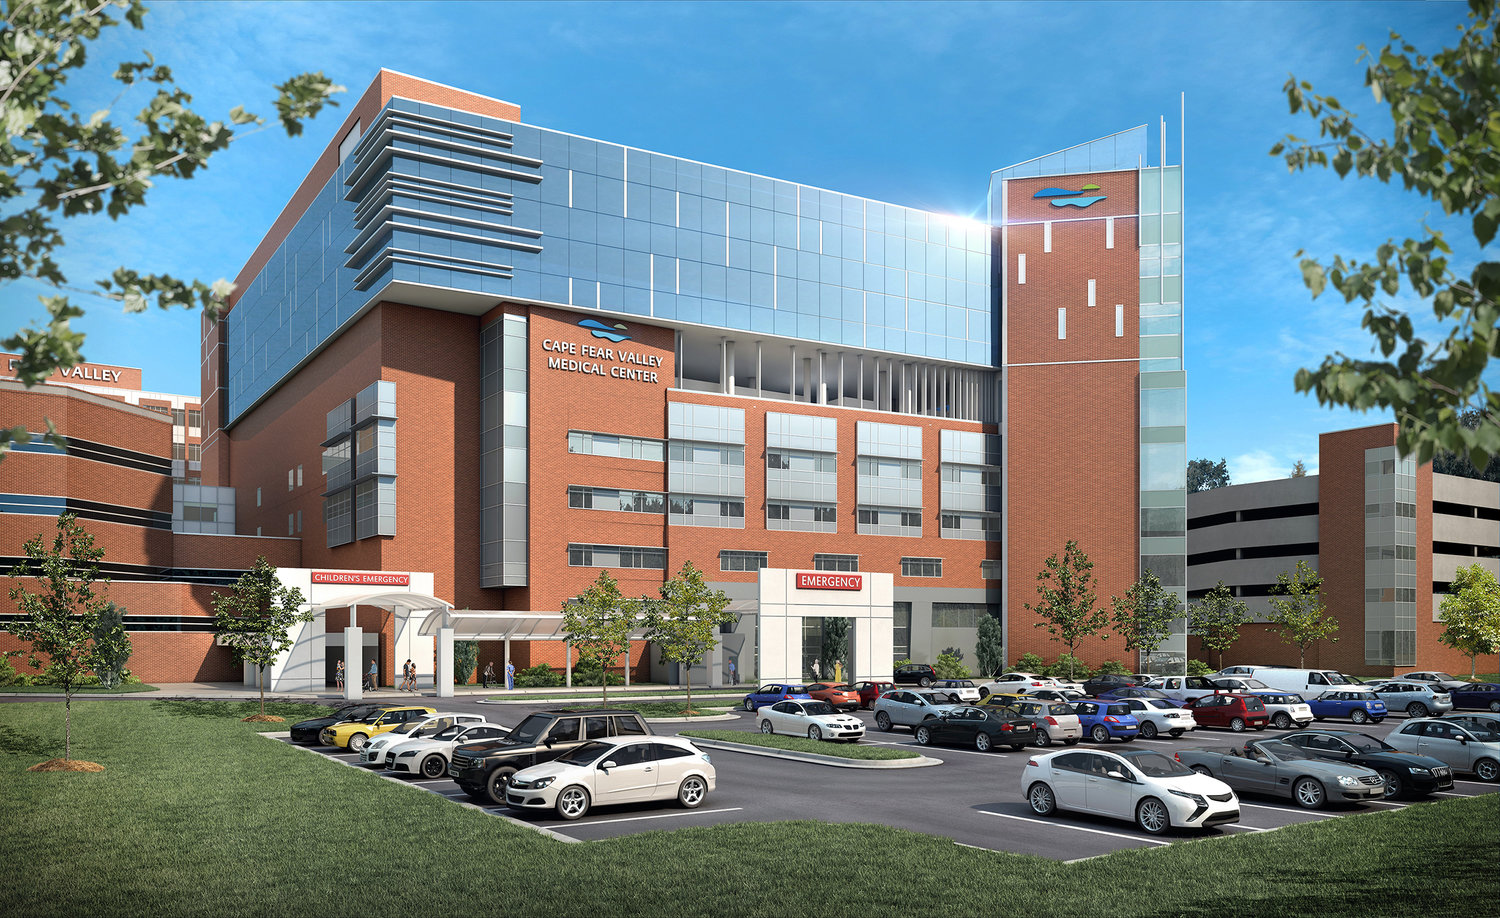 An artist’s rendering of the proposed $110 million expansion to Cape Fear Valley Medical Center that will add 100 beds.